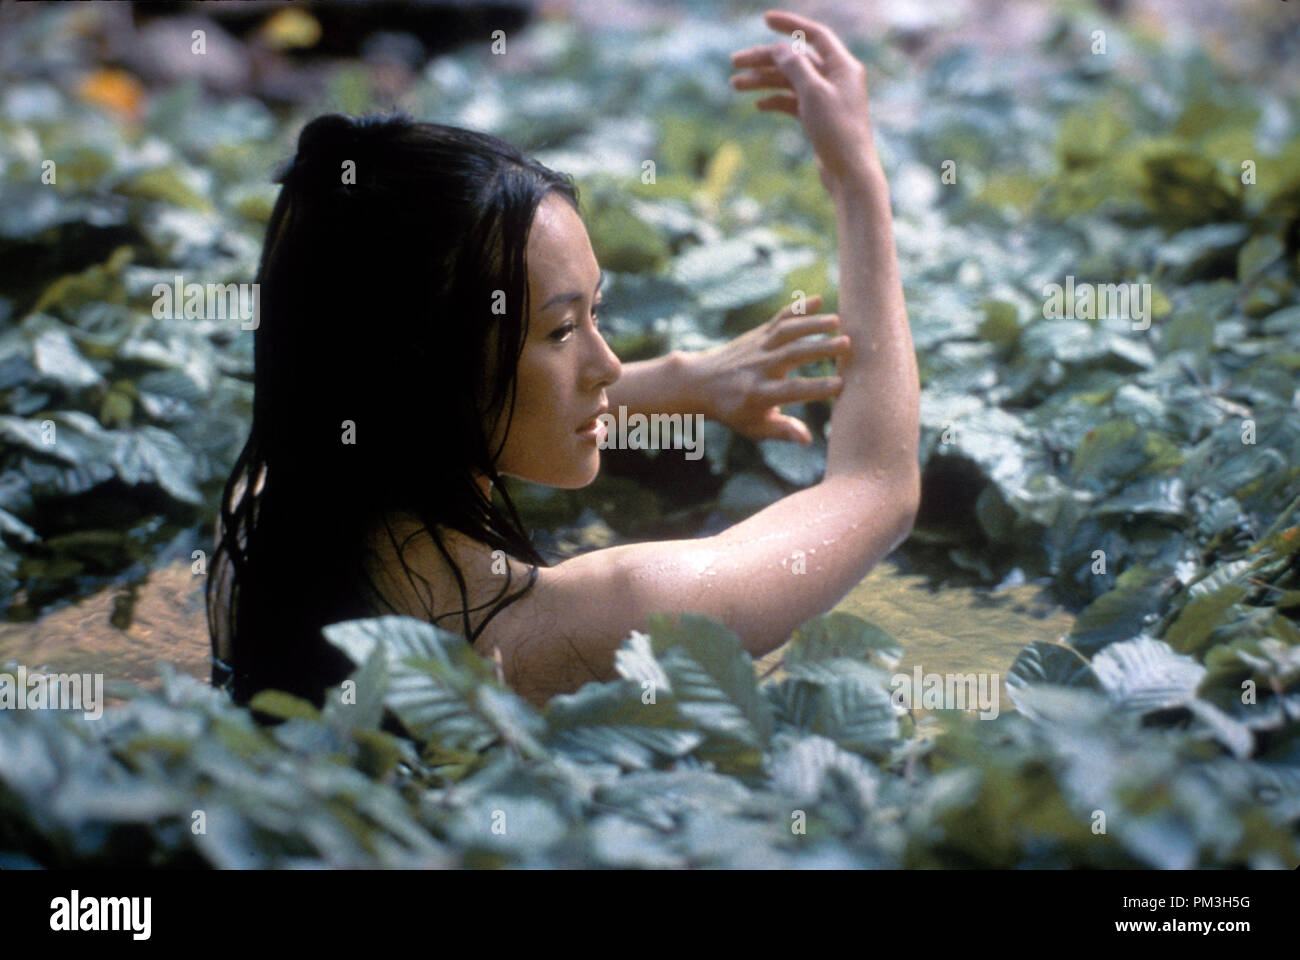 Film Still from 'House of Flying Daggers' Ziyi Zhang © 2004 Sony Pictures Photo Credit: Bai Xiao Yan  File Reference # 30735872THA  For Editorial Use Only -  All Rights Reserved Stock Photo